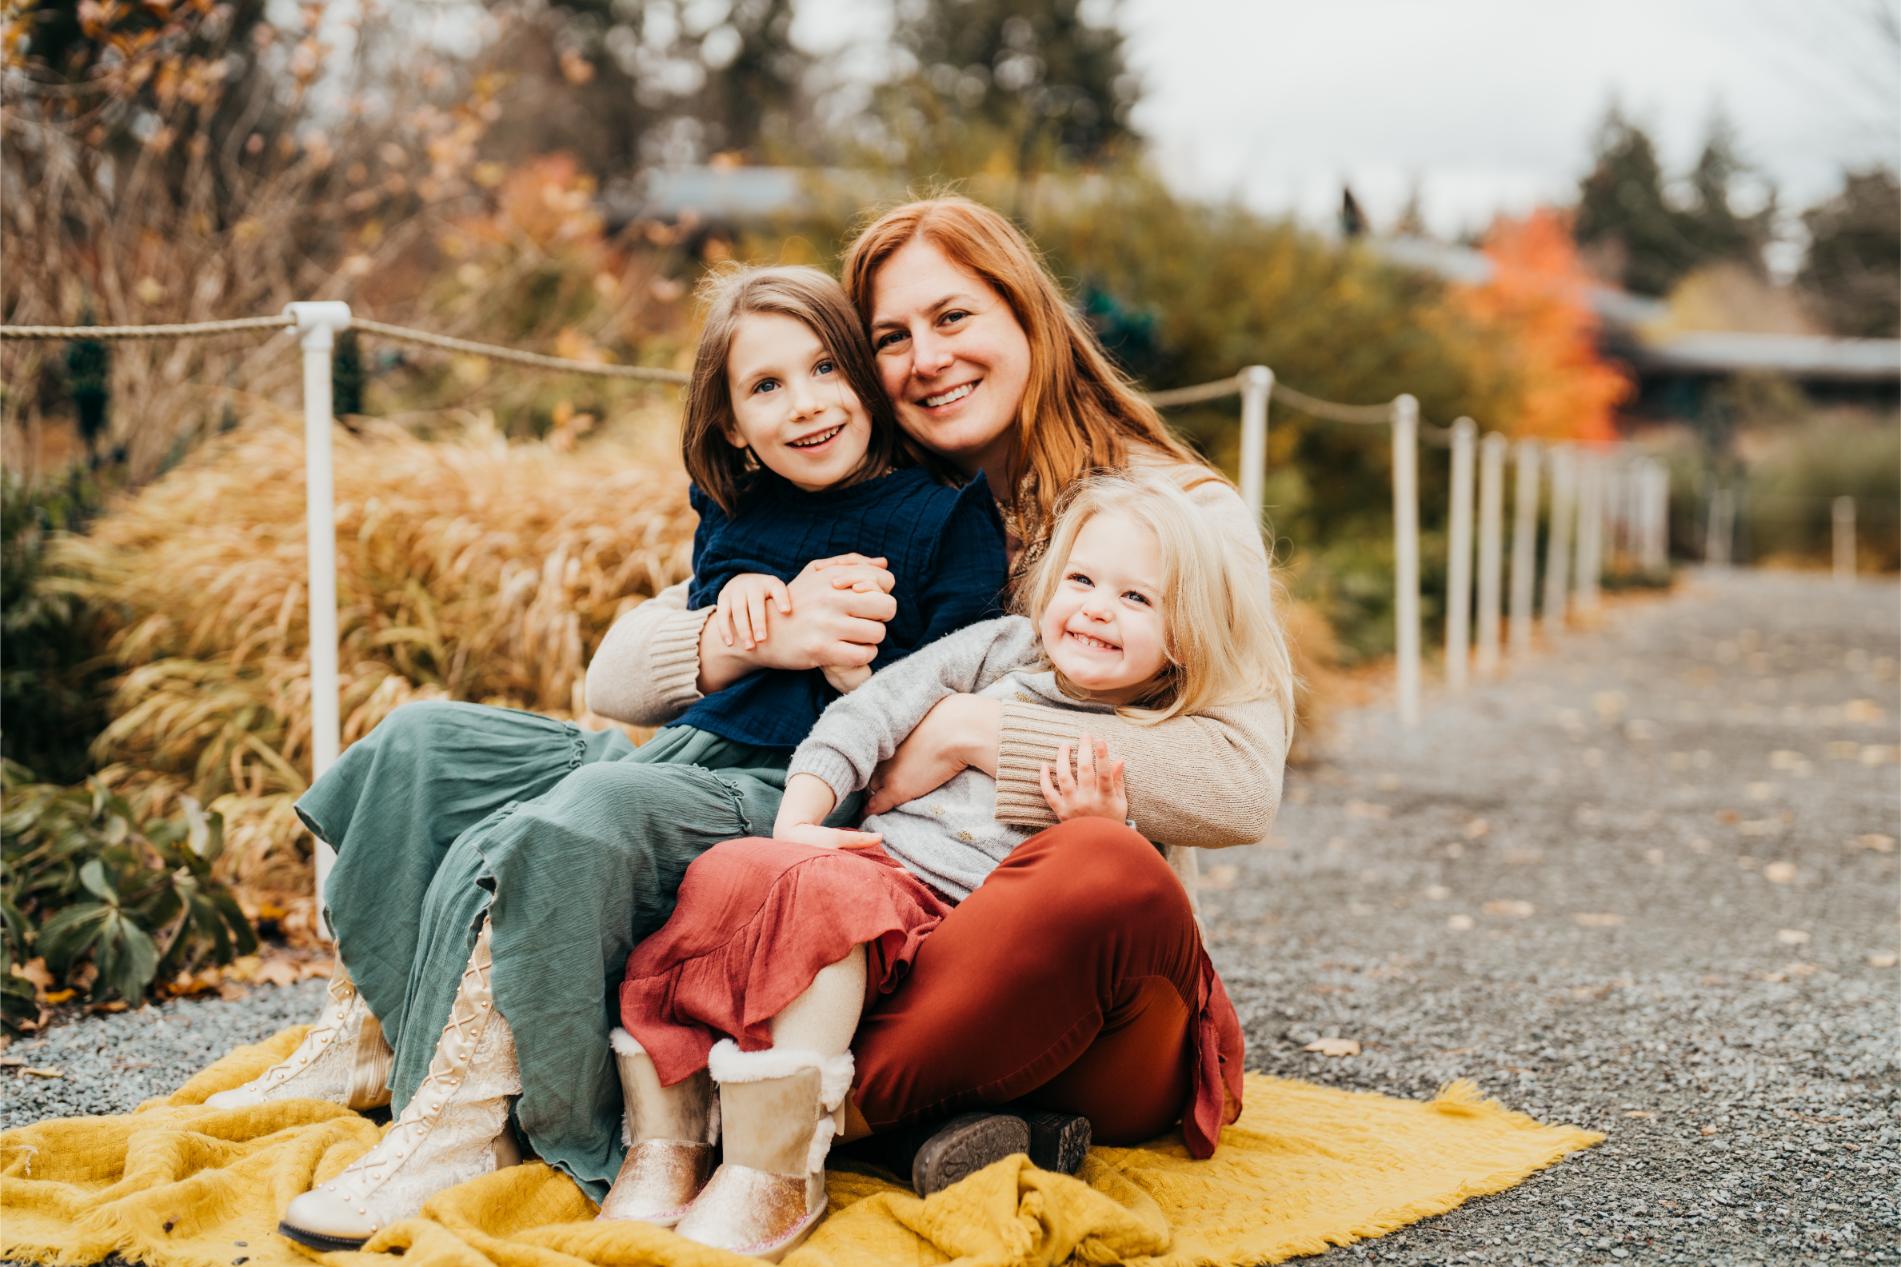 bellevue mom taking family photo with her two adorable smiling kids